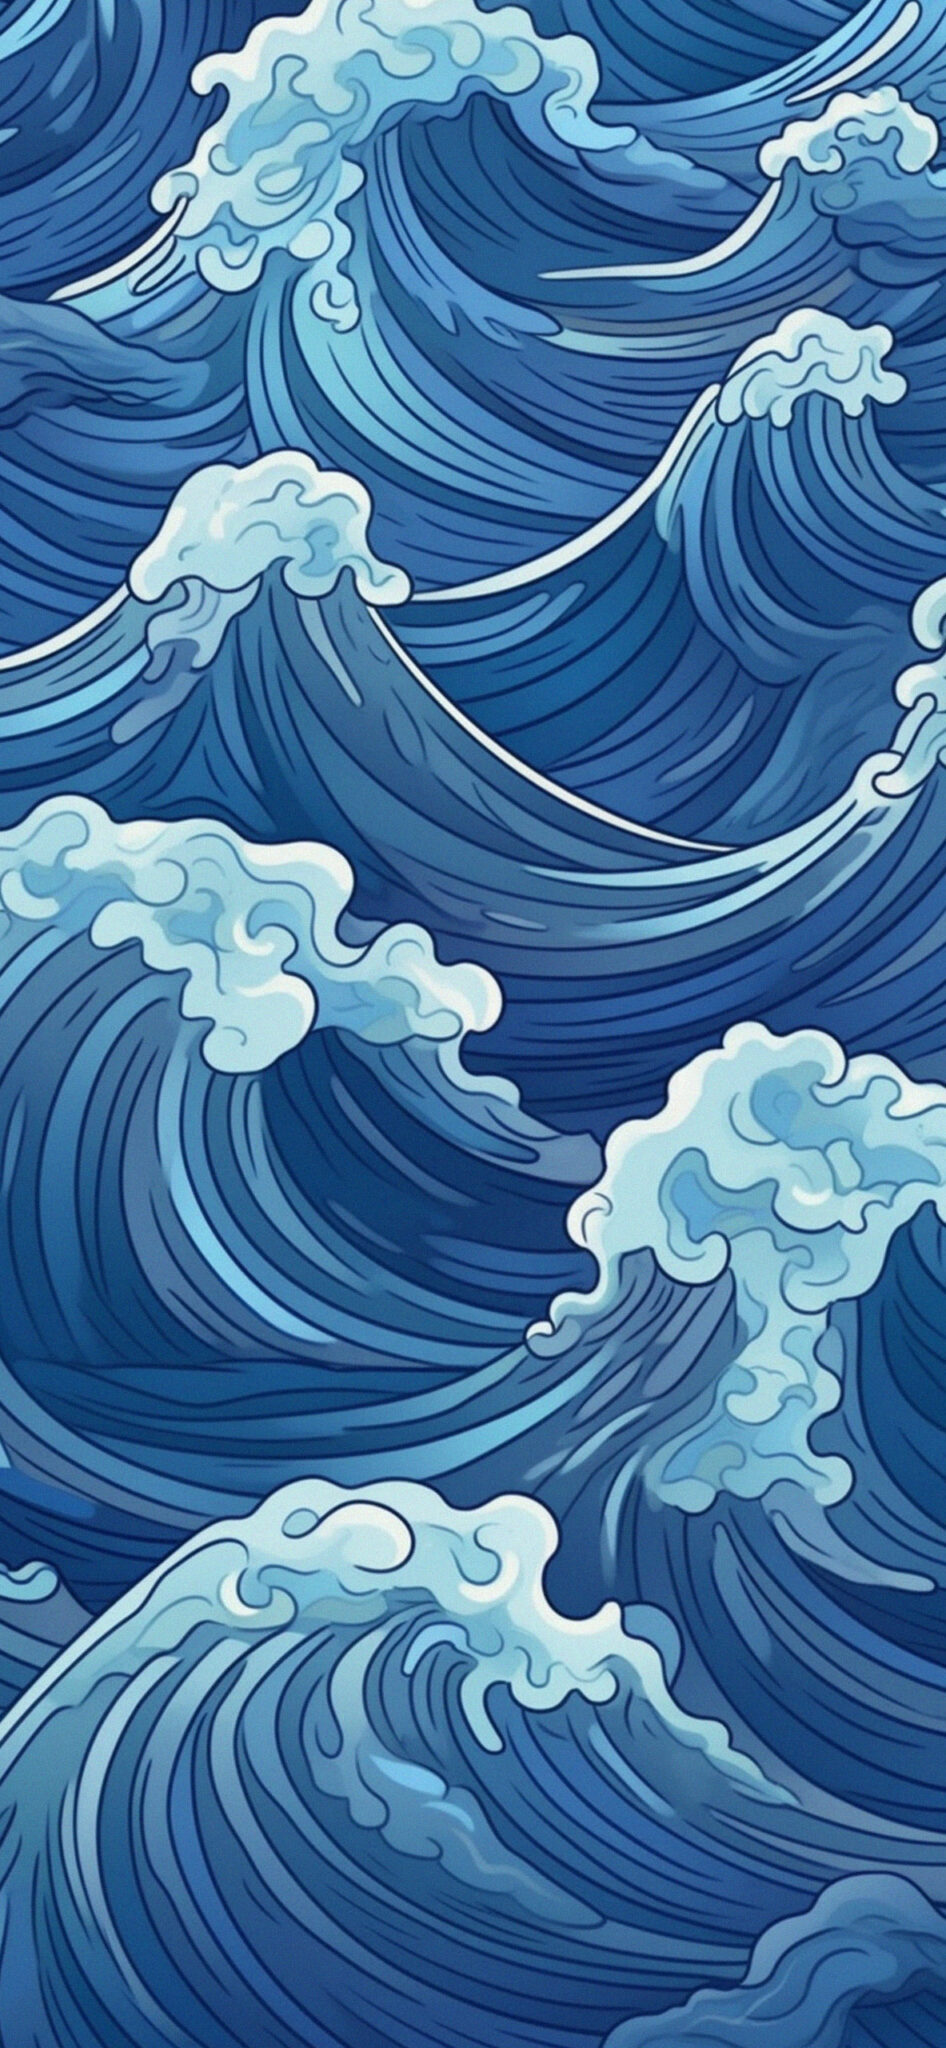 Cartoon Waves Art Wallpapers - Free Water Wallpapers for iPhone